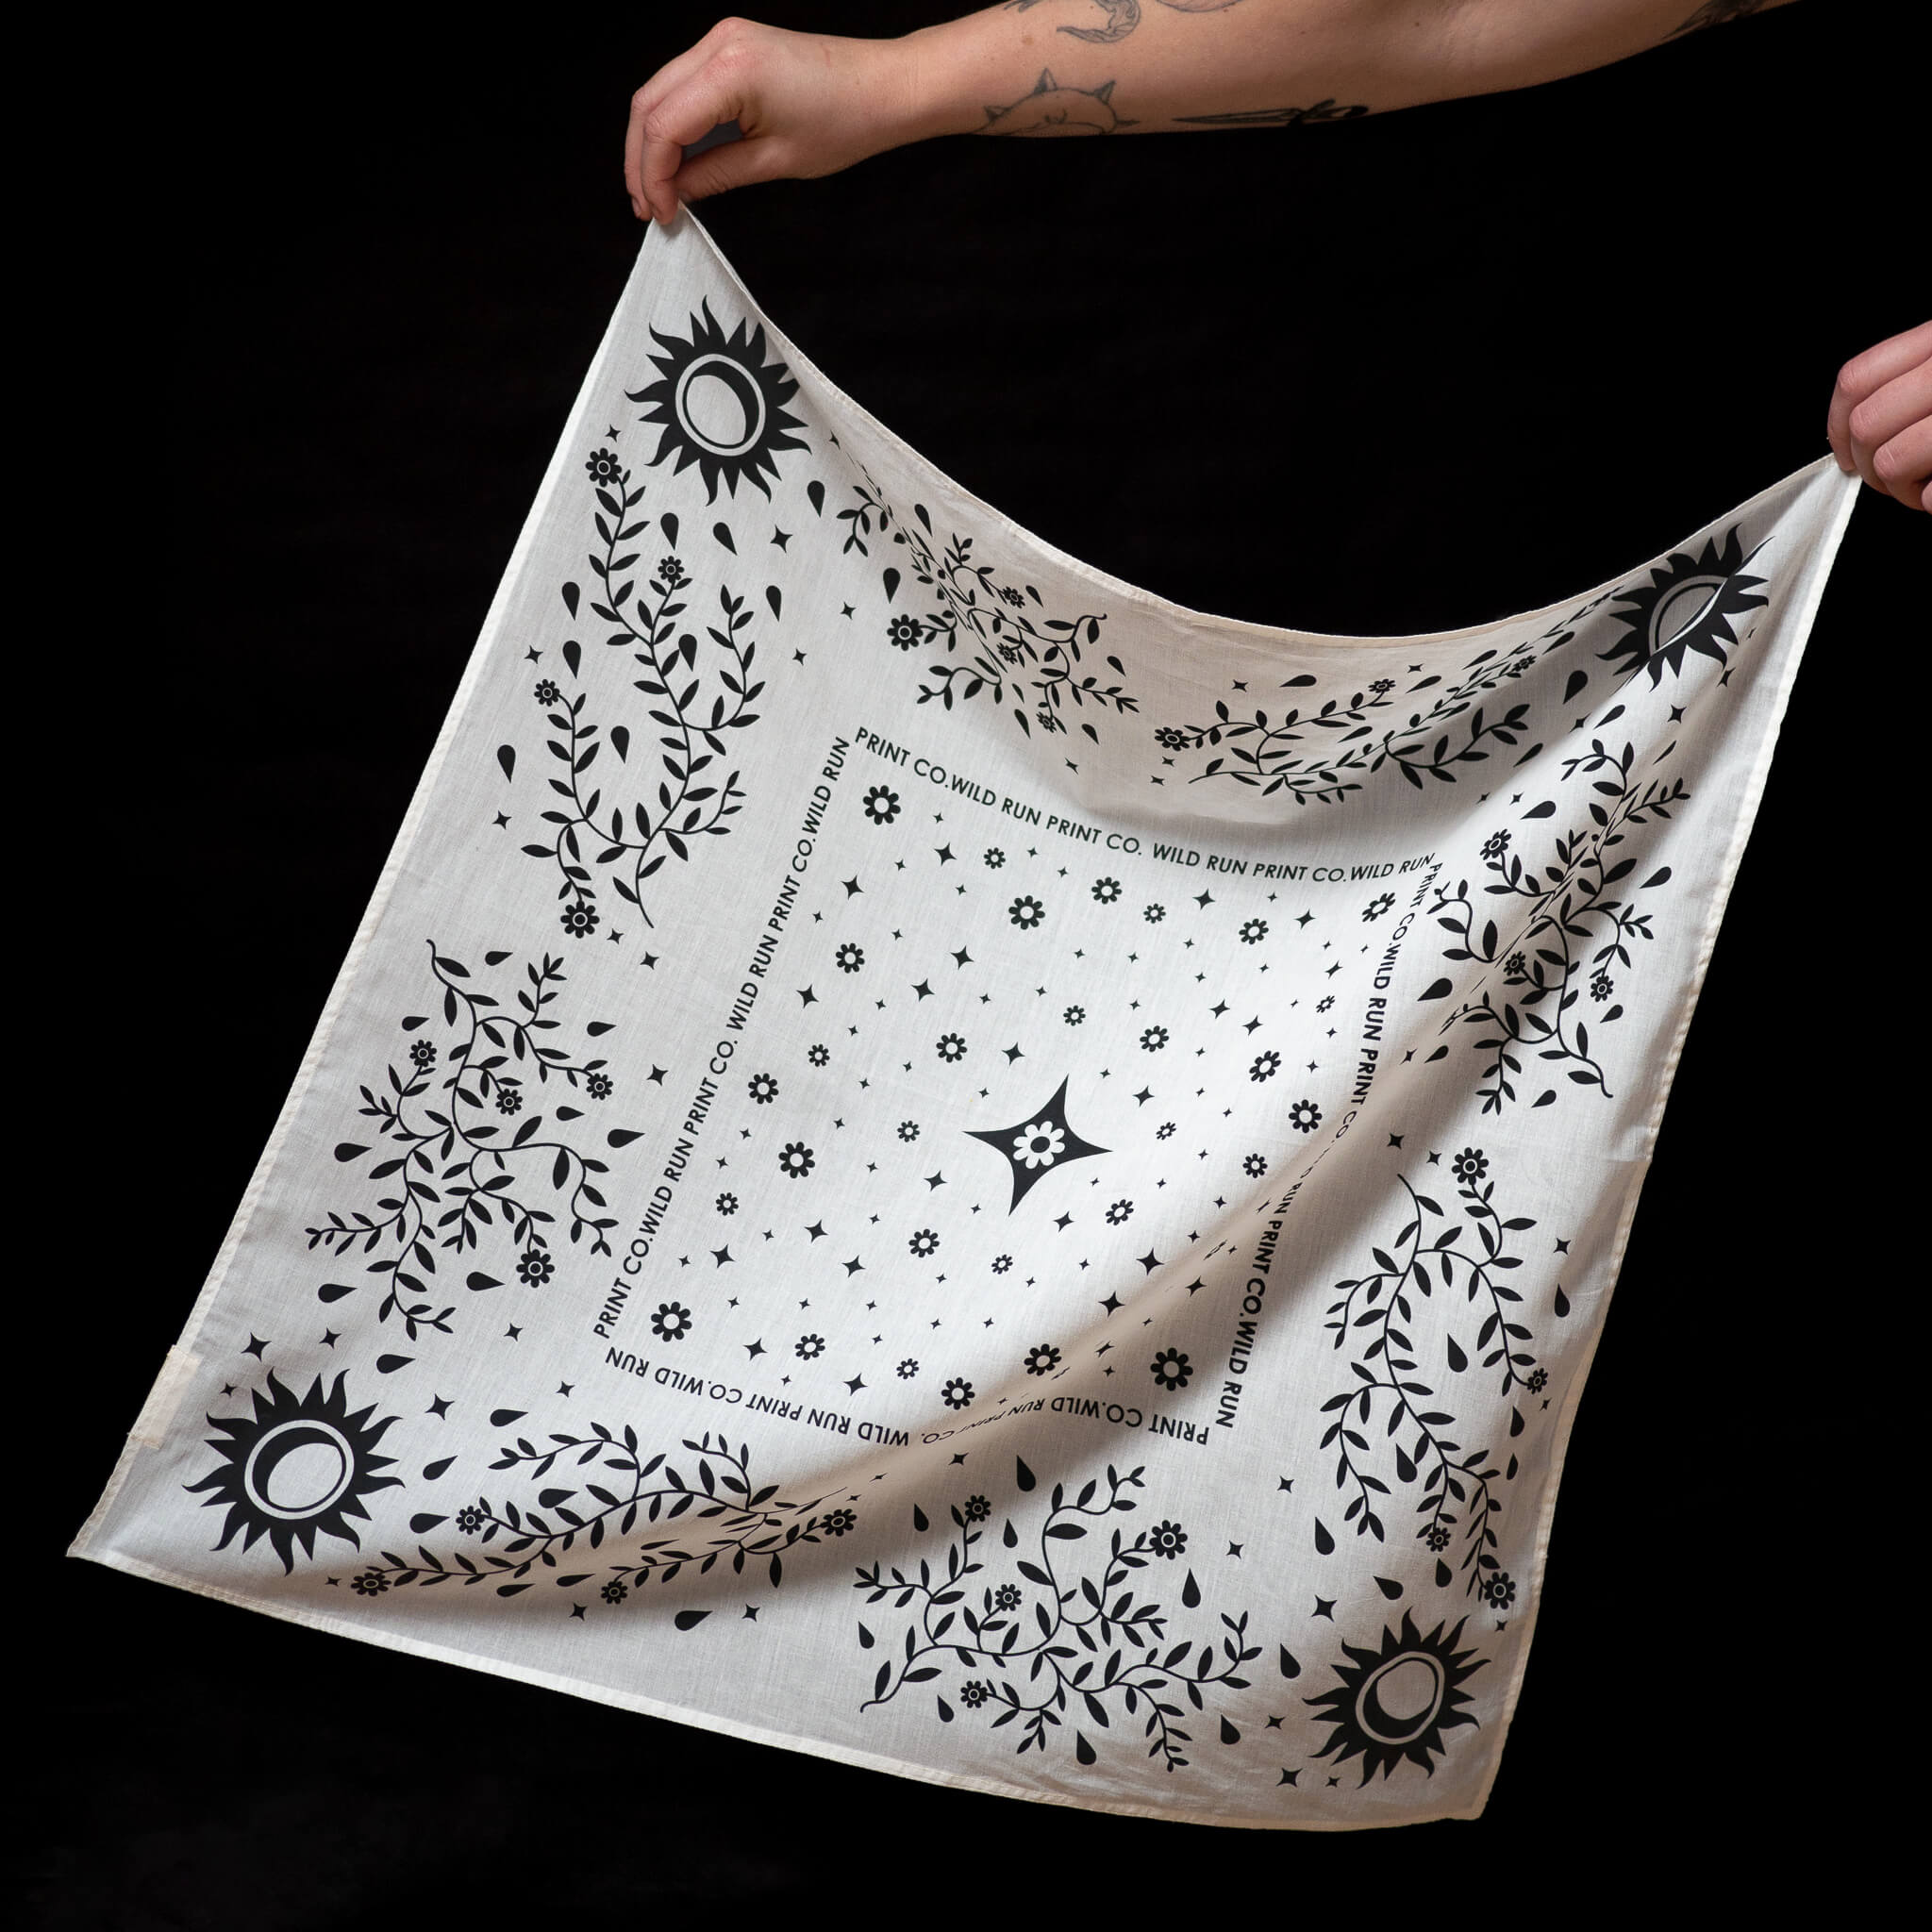 A person holds up a Wild Run Print Co. bandana with black and white botanical sun and flower designs against a black background